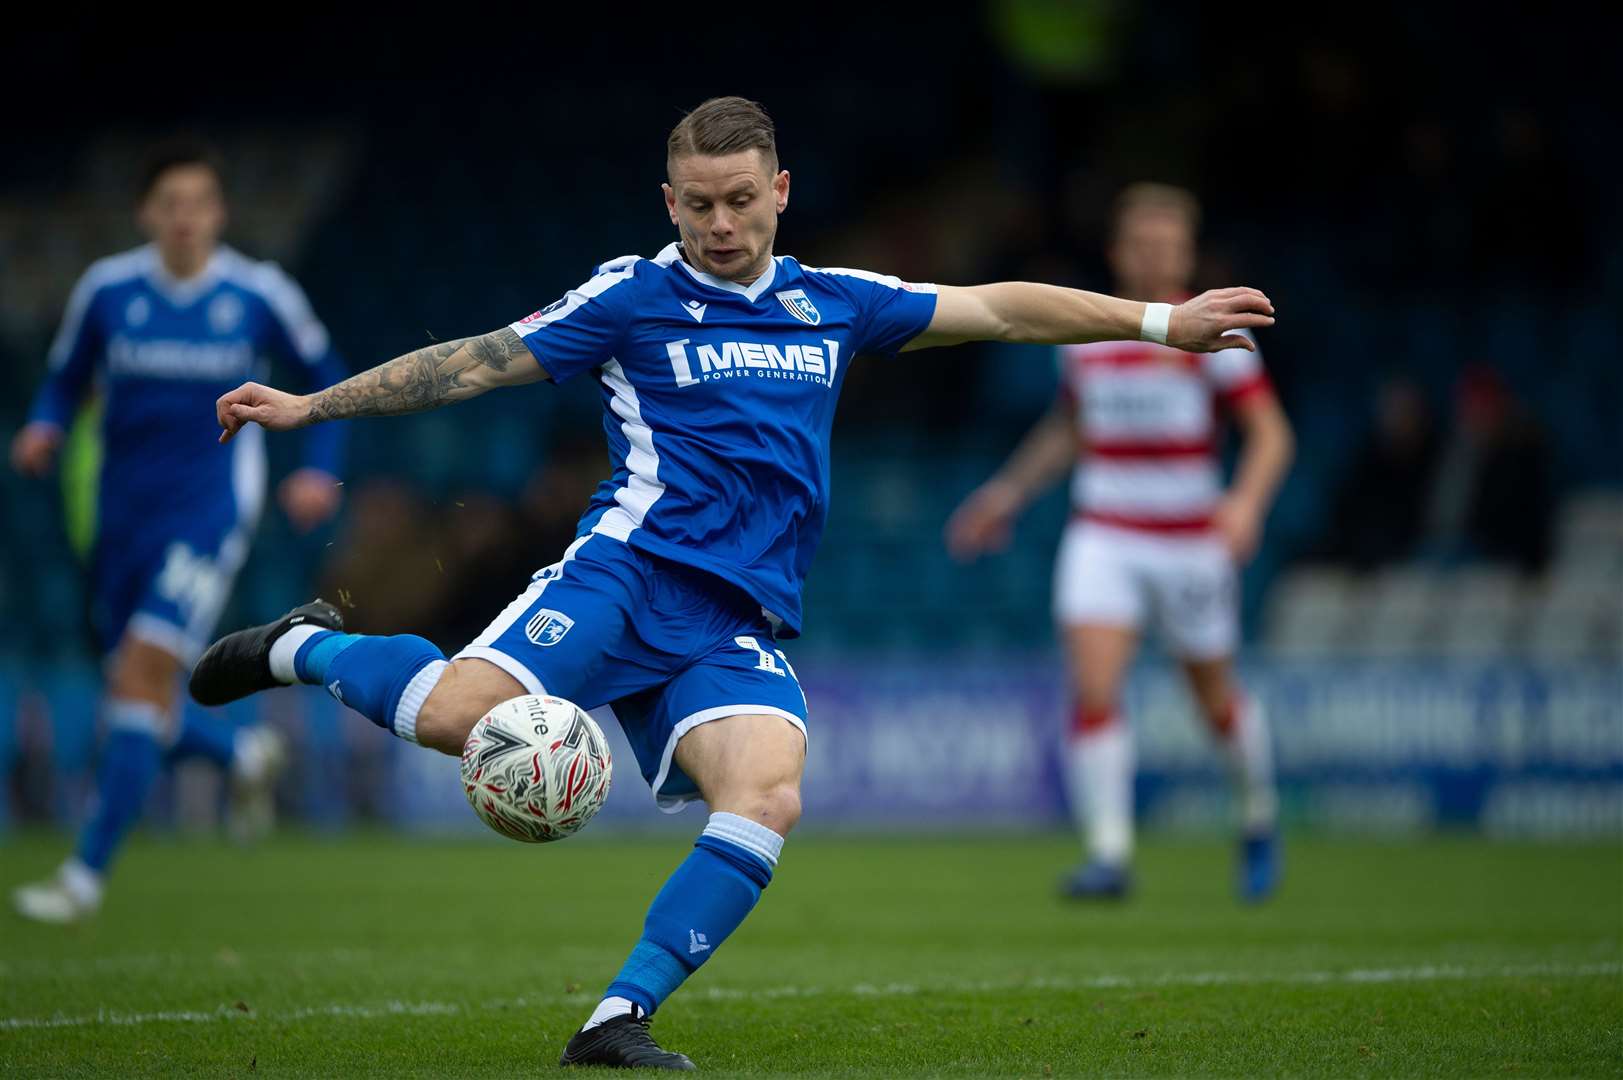 Gills midfielder in action against Doncaster Picture: Ady Kerry